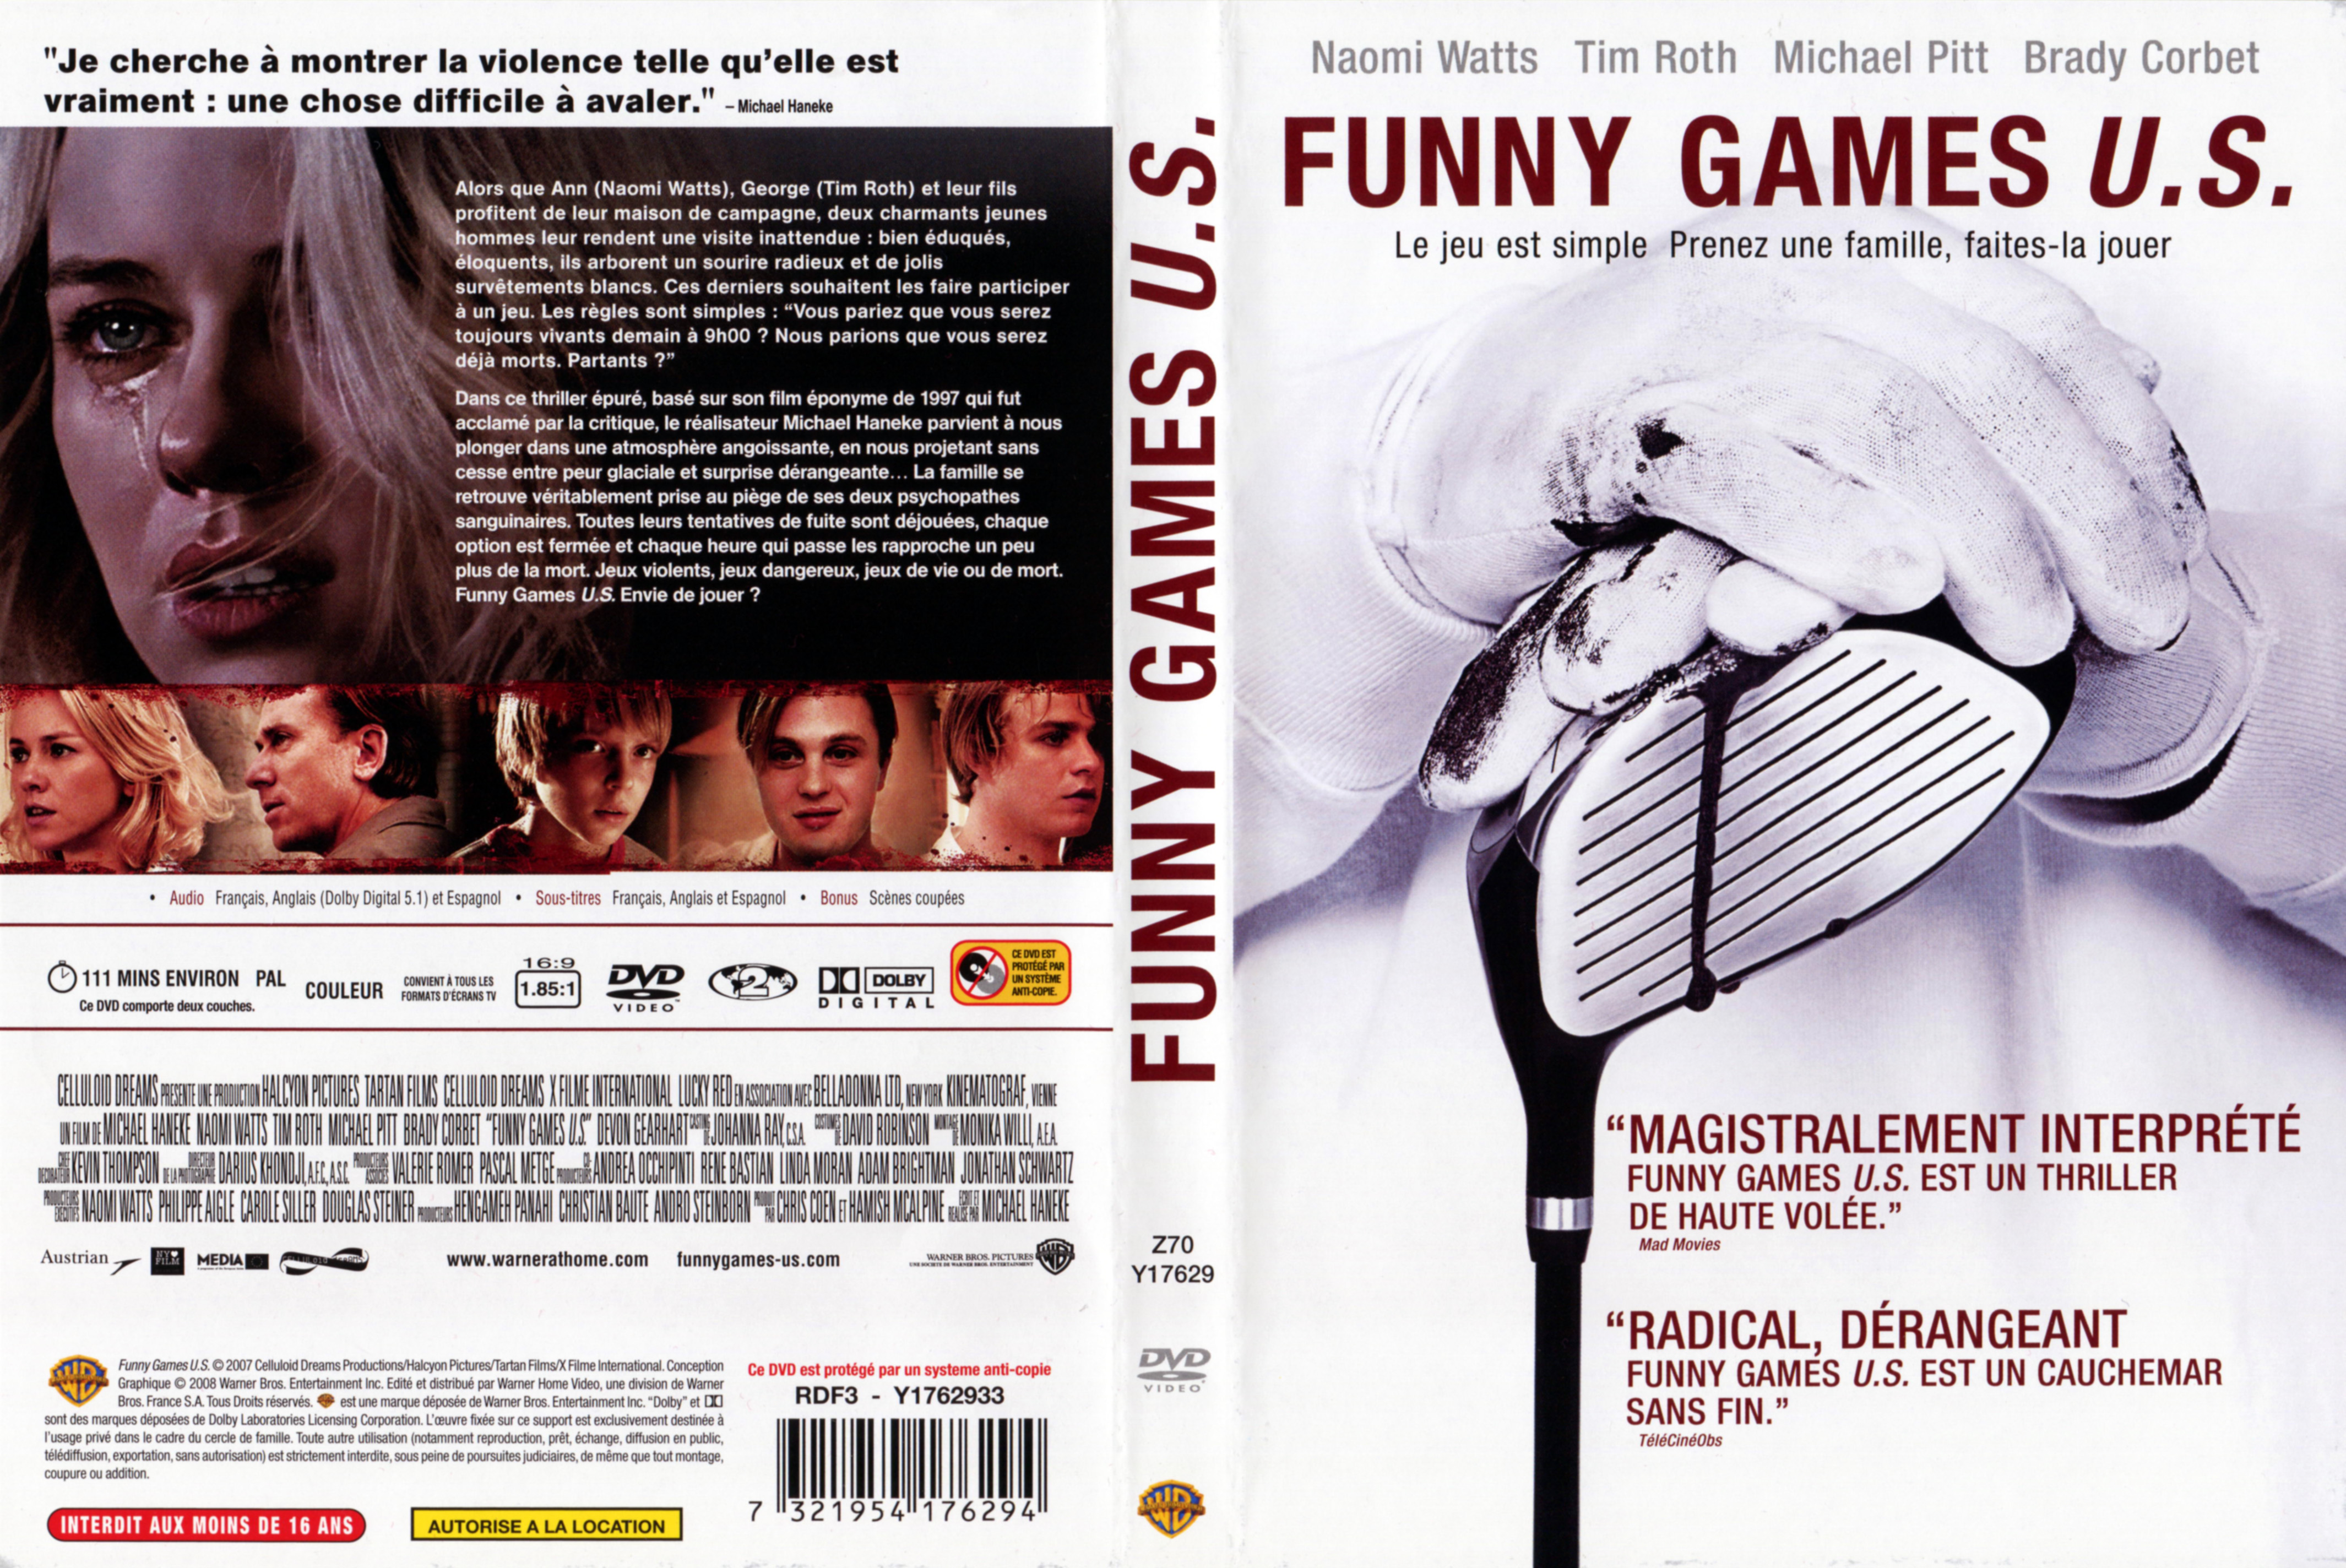 Jaquette DVD Funny games US